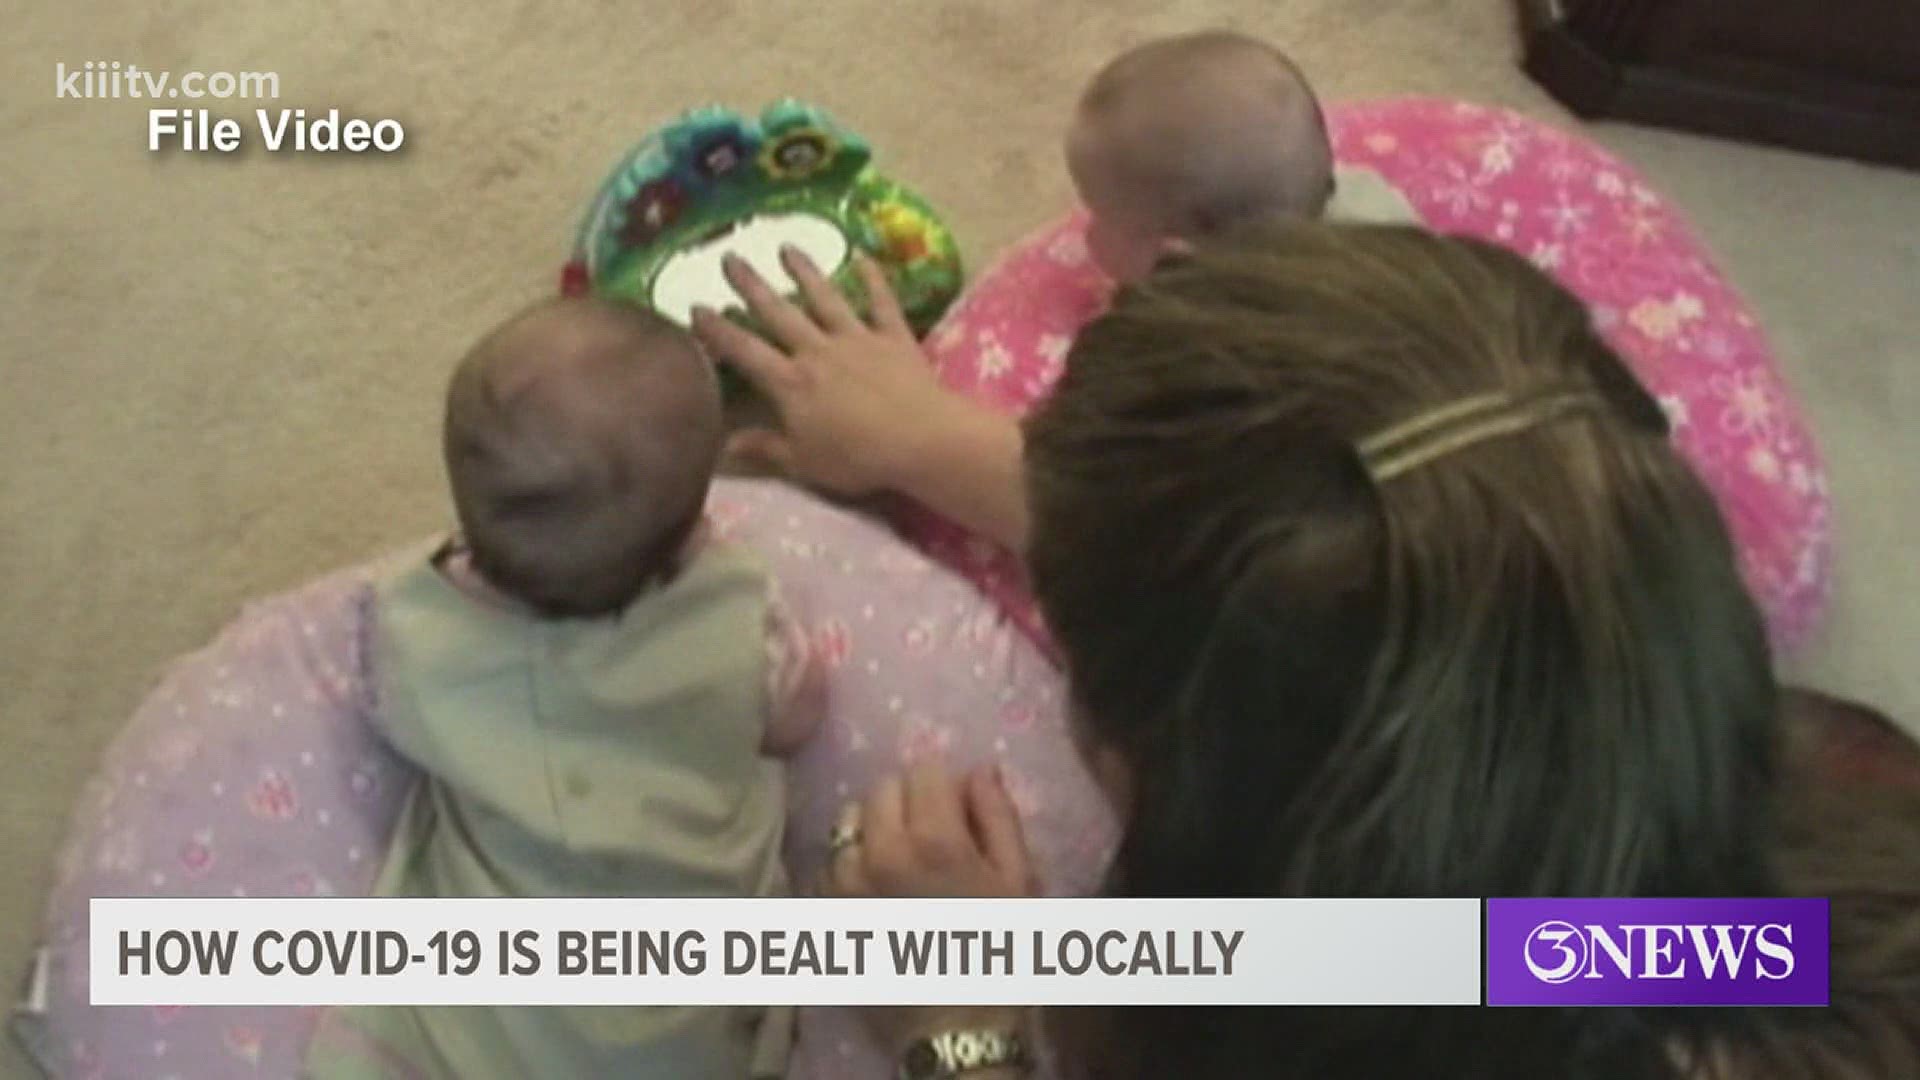 The Health Department says the number of babies that are COVID positive is close to 167.